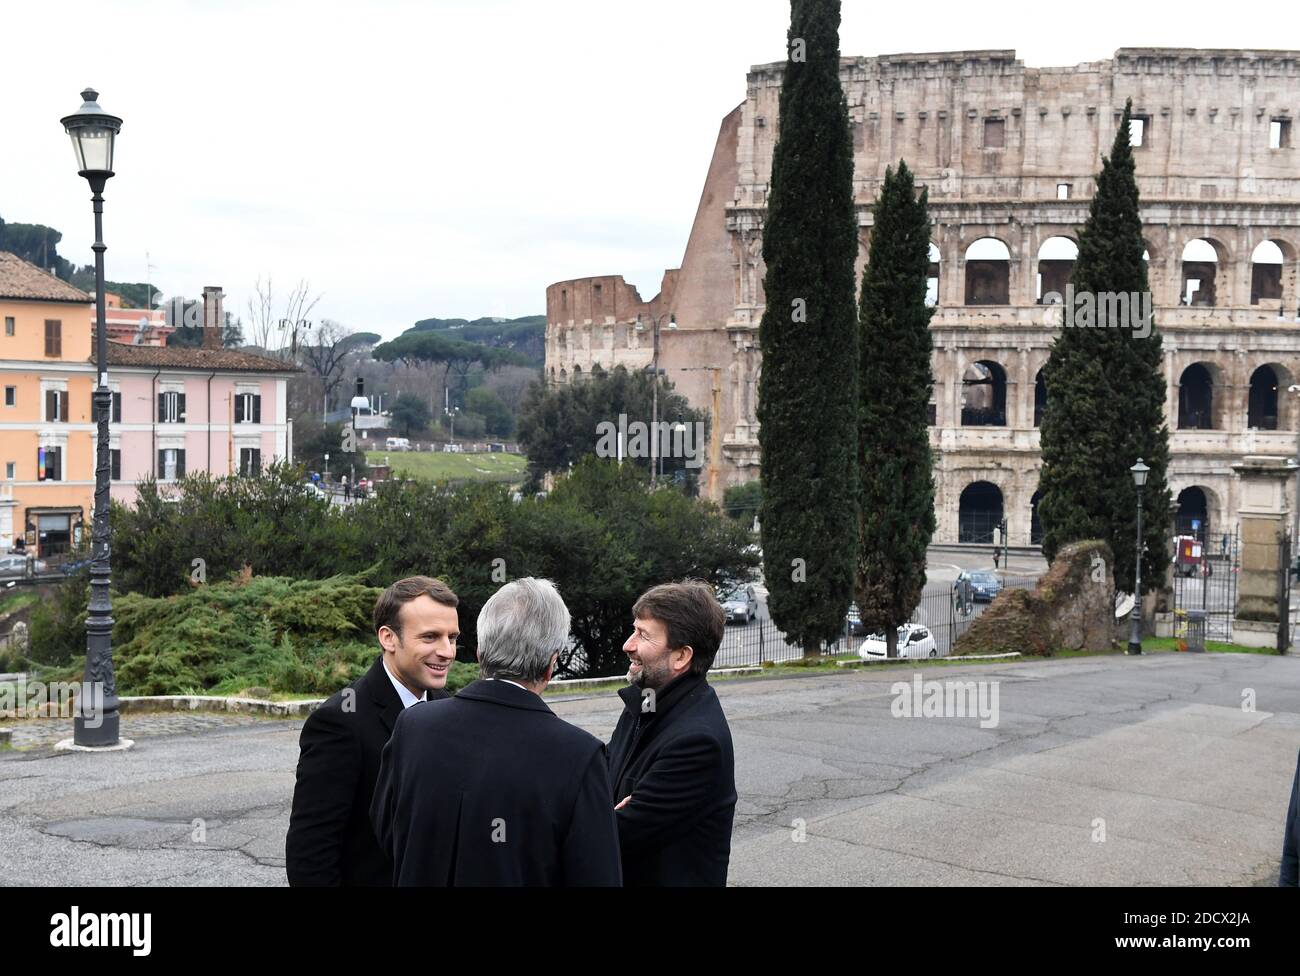 France's President Emmanuel Macron (L) poses with Italy's Cultural Heritage and Activities Minister Dario Franceschini (R) and Italy's Prime Minister Paolo Gentiloni (C) in front of the Colosseum before their visit at the Domus Aurea, the house built by Roman Emperor Nero, on January 11, 2018 in Rome, Italy. Photo : Eric Vandeville/ABACAPRESS.COM Stock Photo